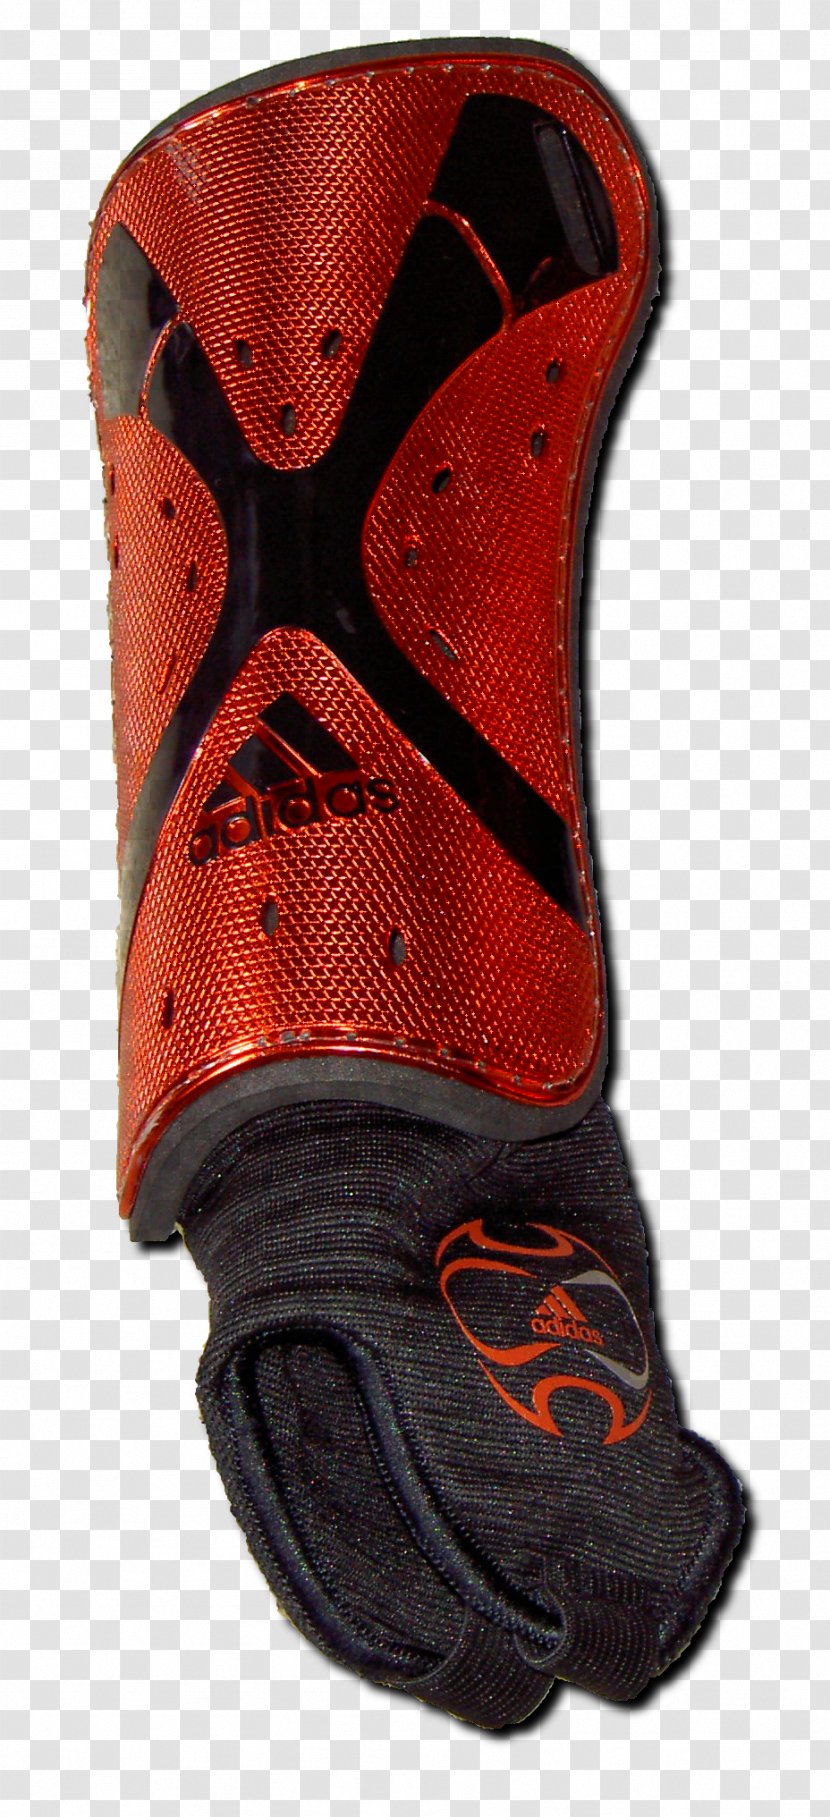 Football Shin Guard Kit Greave Sport - Protective Gear In Sports - Adidas Transparent PNG